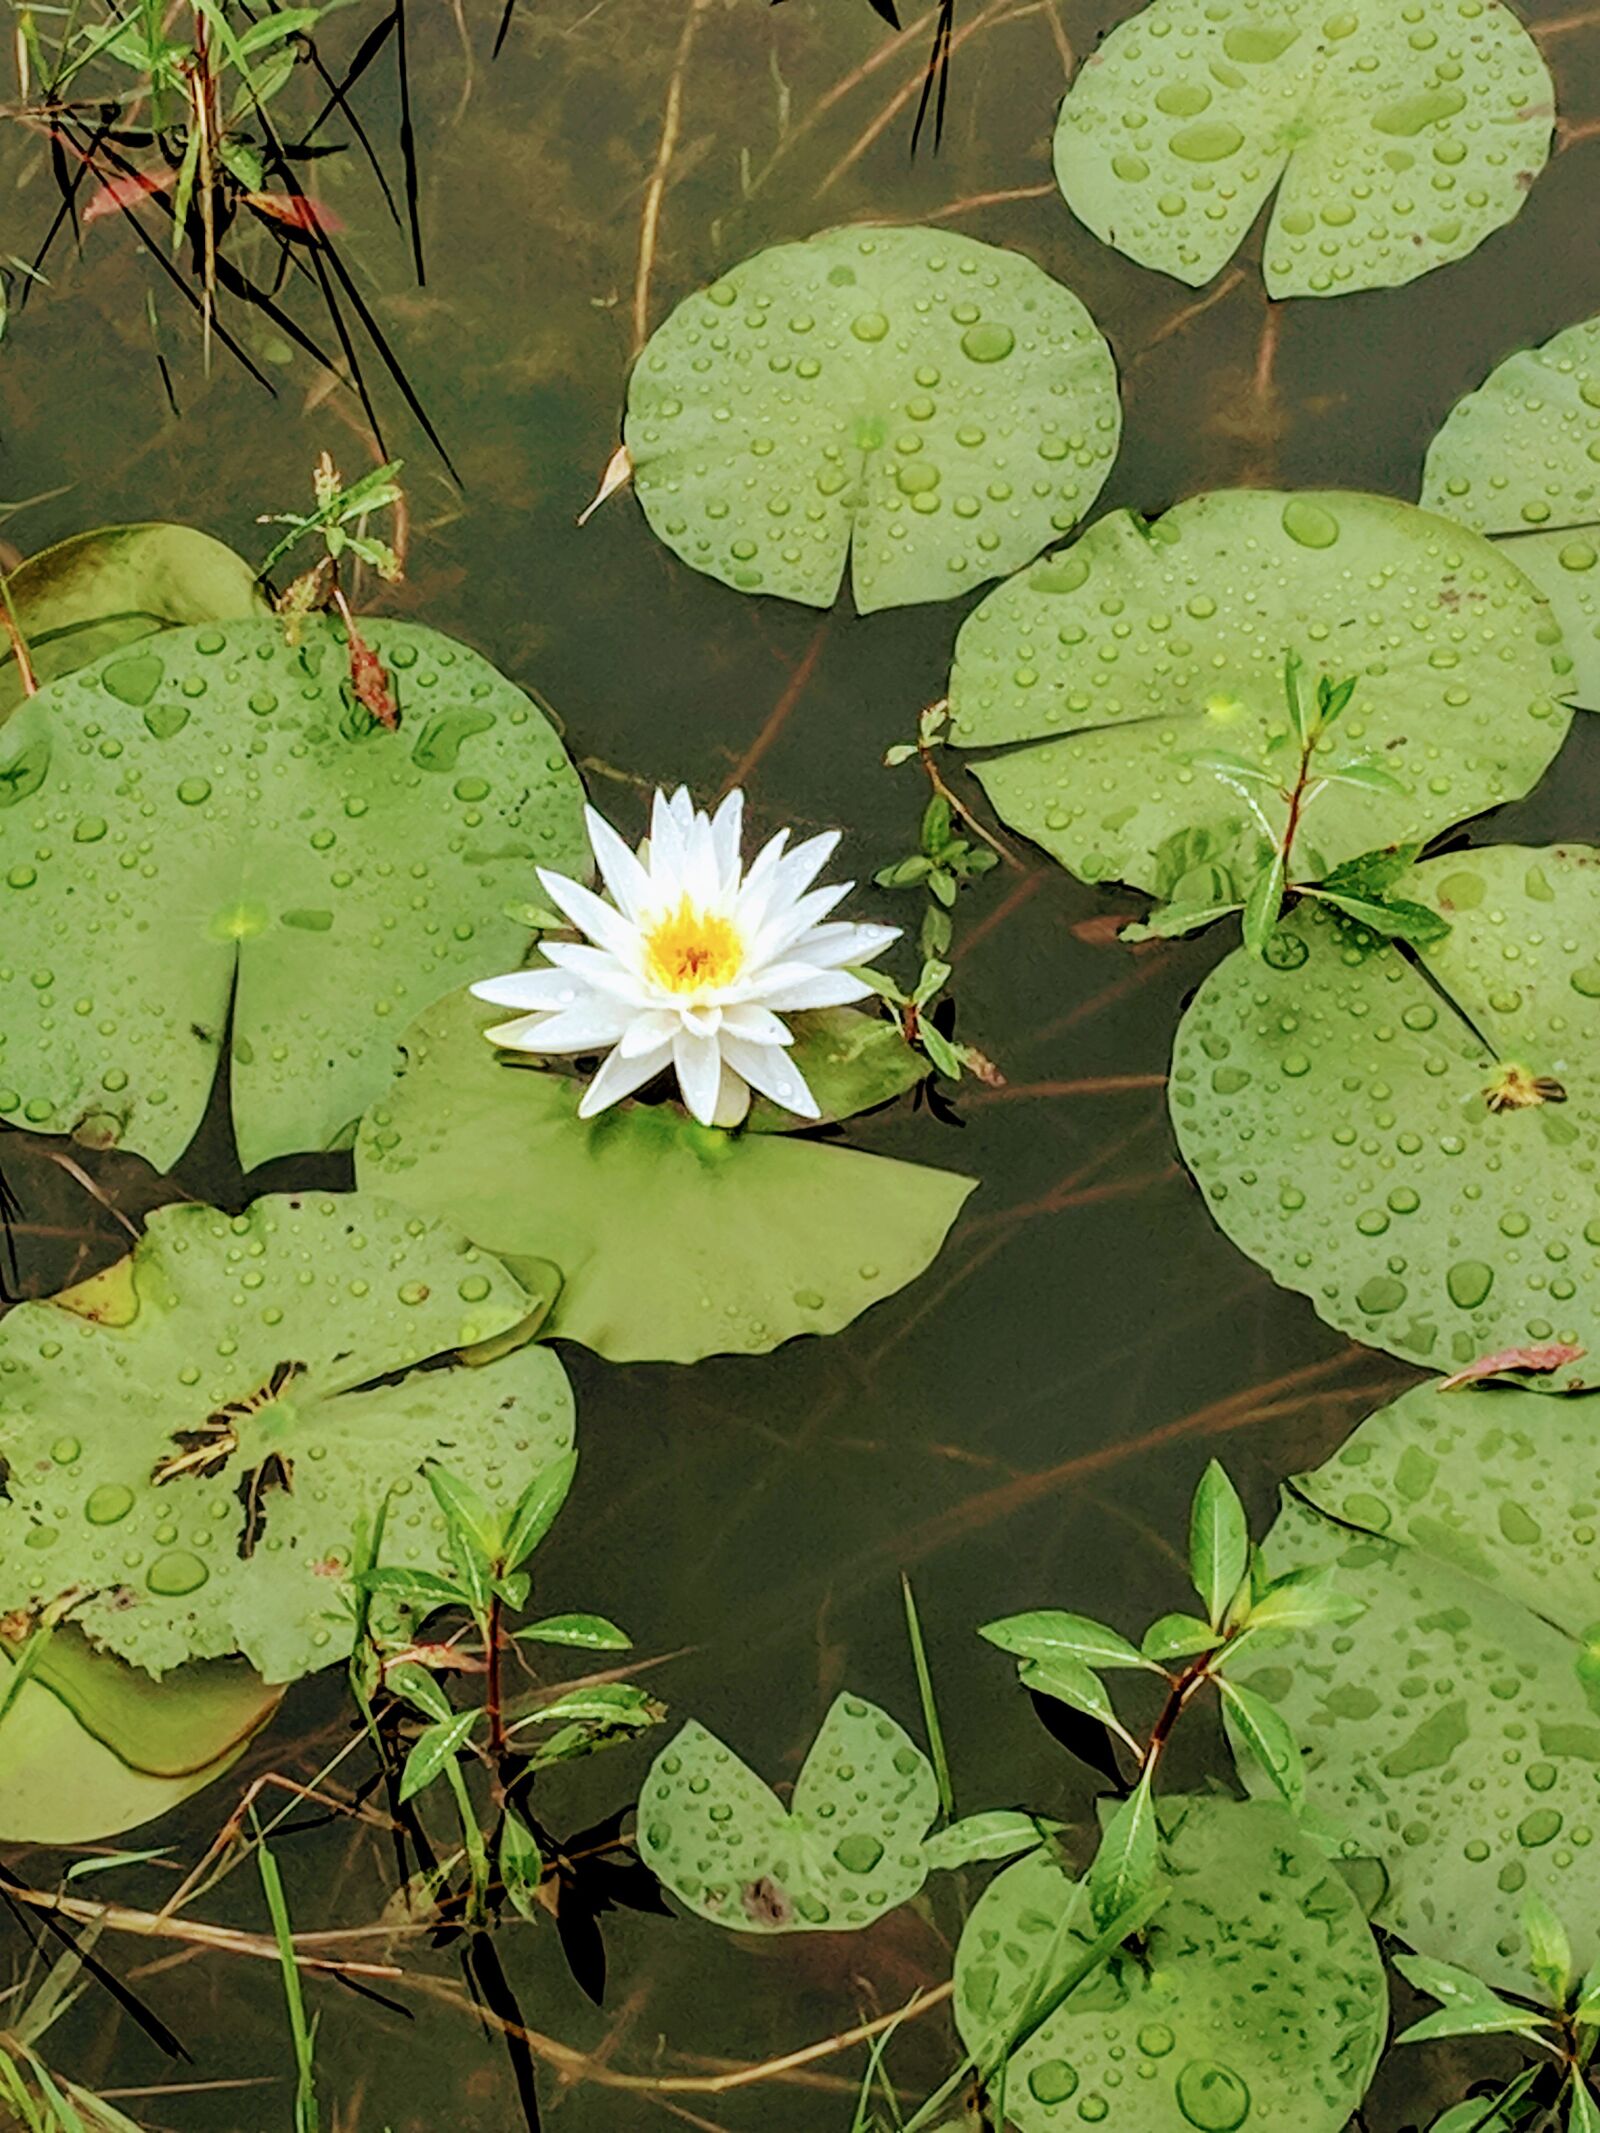 Google Pixel sample photo. Pond, lilly pad, green photography